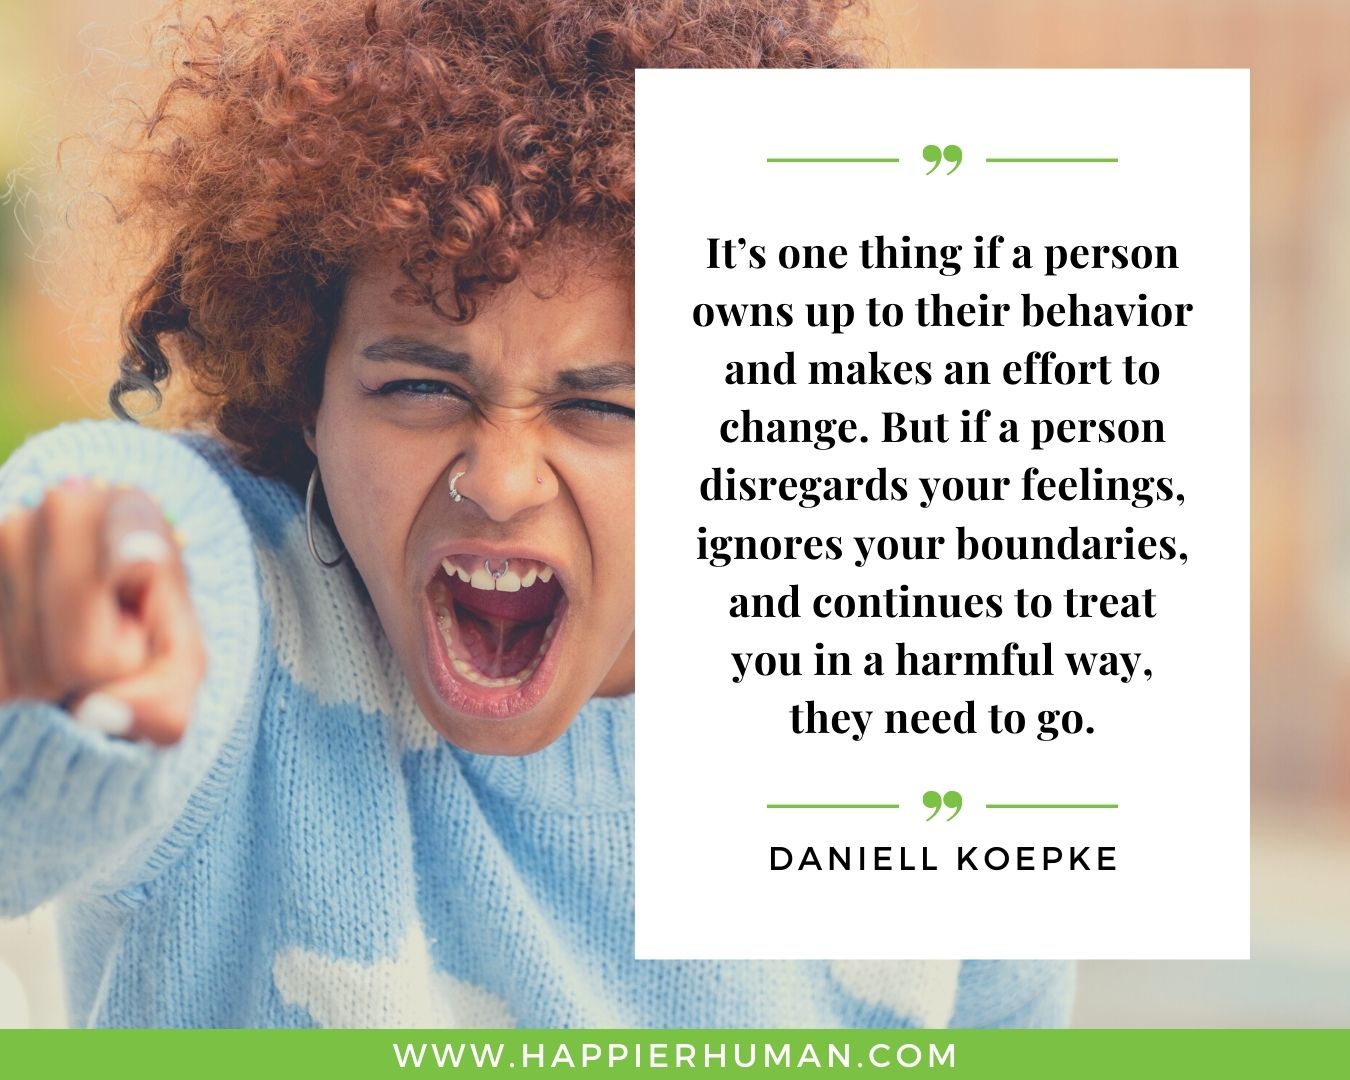 Toxic People Quotes - “It’s one thing if a person owns up to their behavior and makes an effort to change. But if a person disregards your feelings, ignores your boundaries, and continues to treat you in a harmful way, they need to go.” – Daniell Koepke